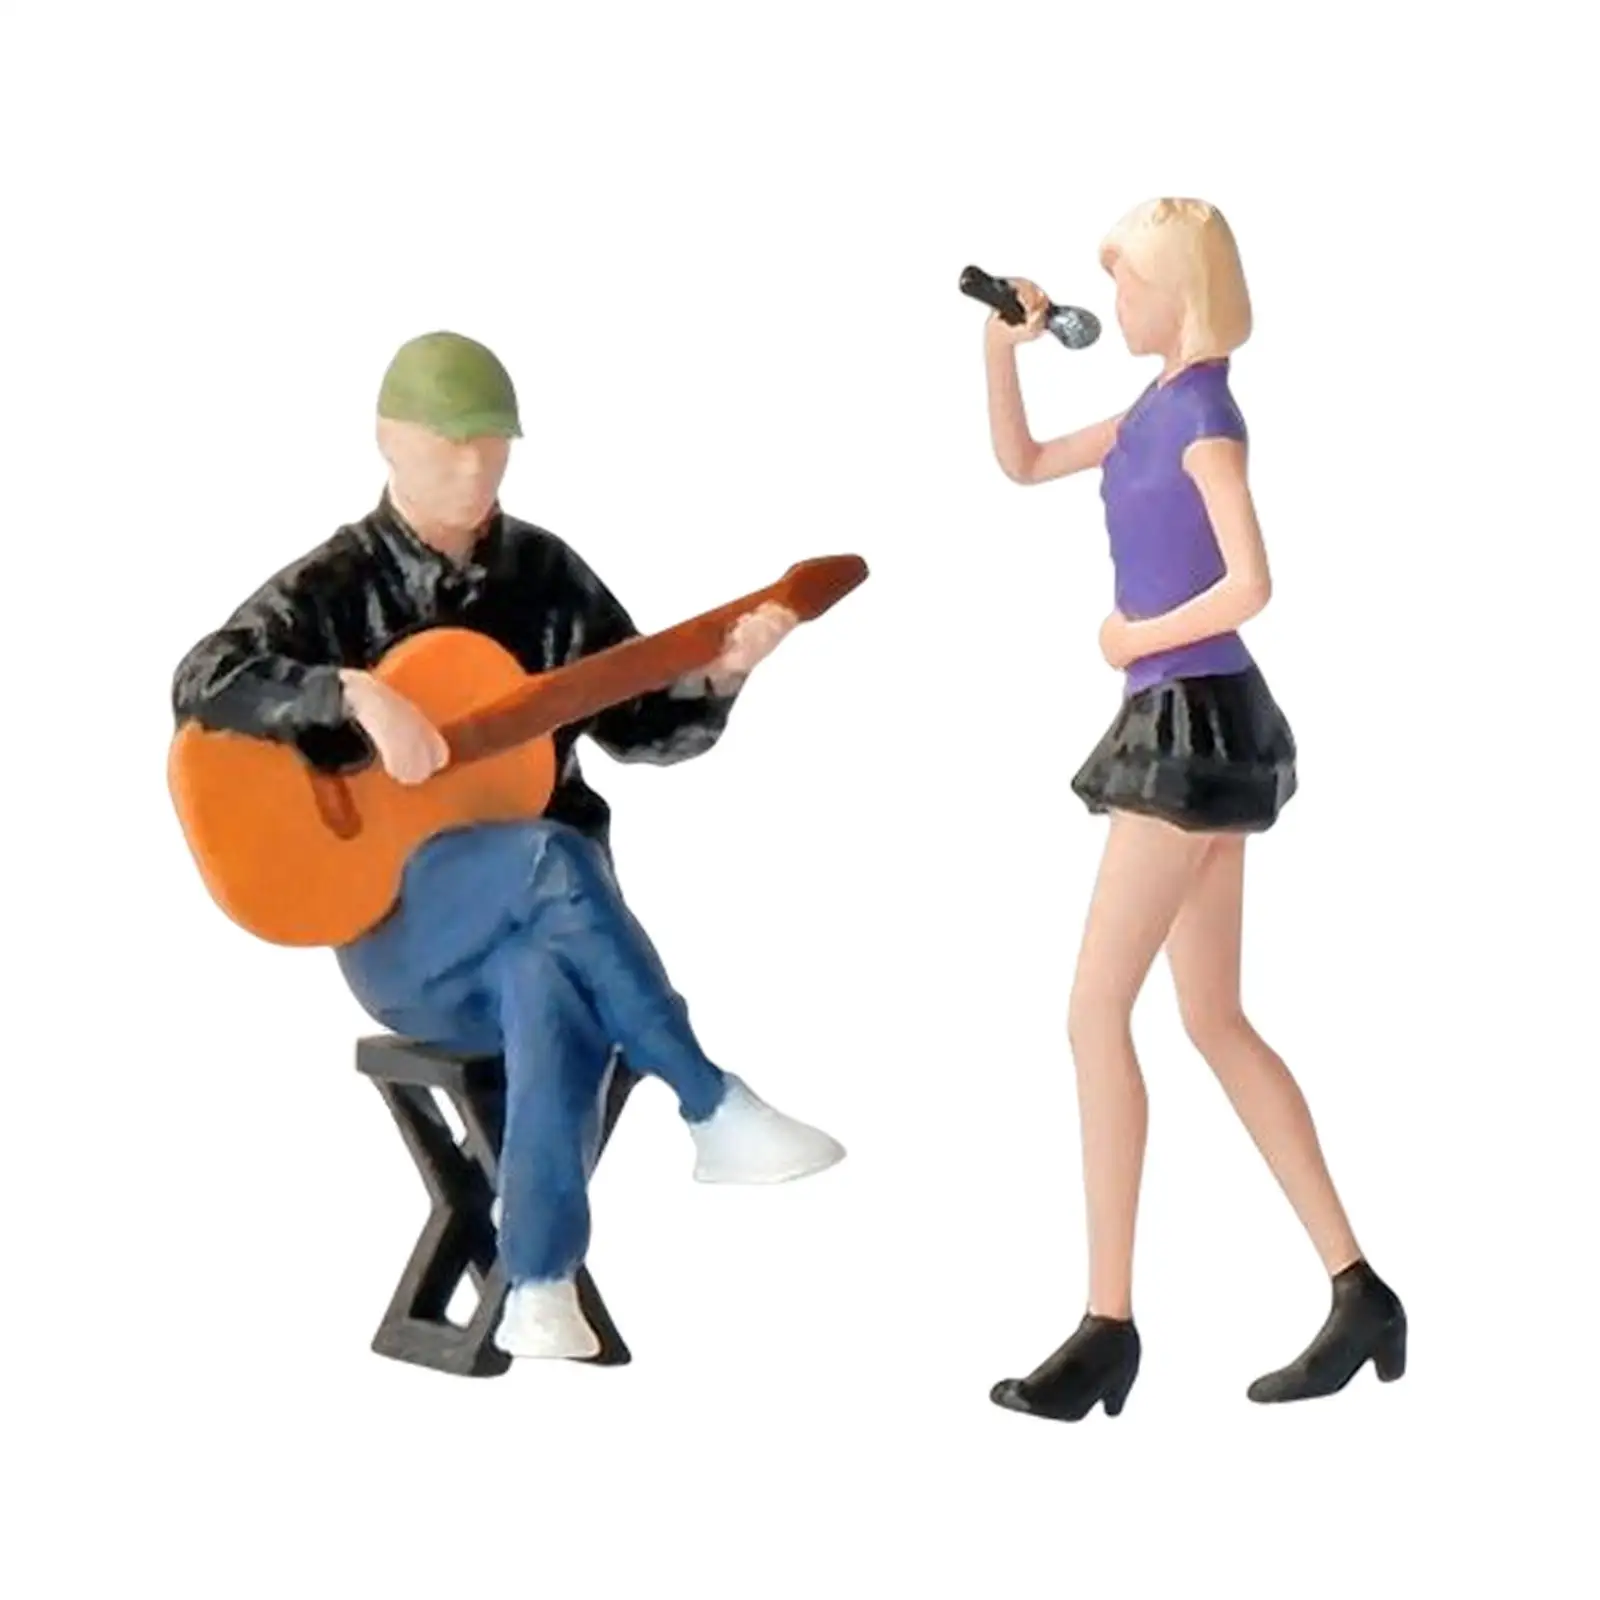 Character Figurine DIY Micro Landscapes People Figurines Diorama for Dollhouse Layout